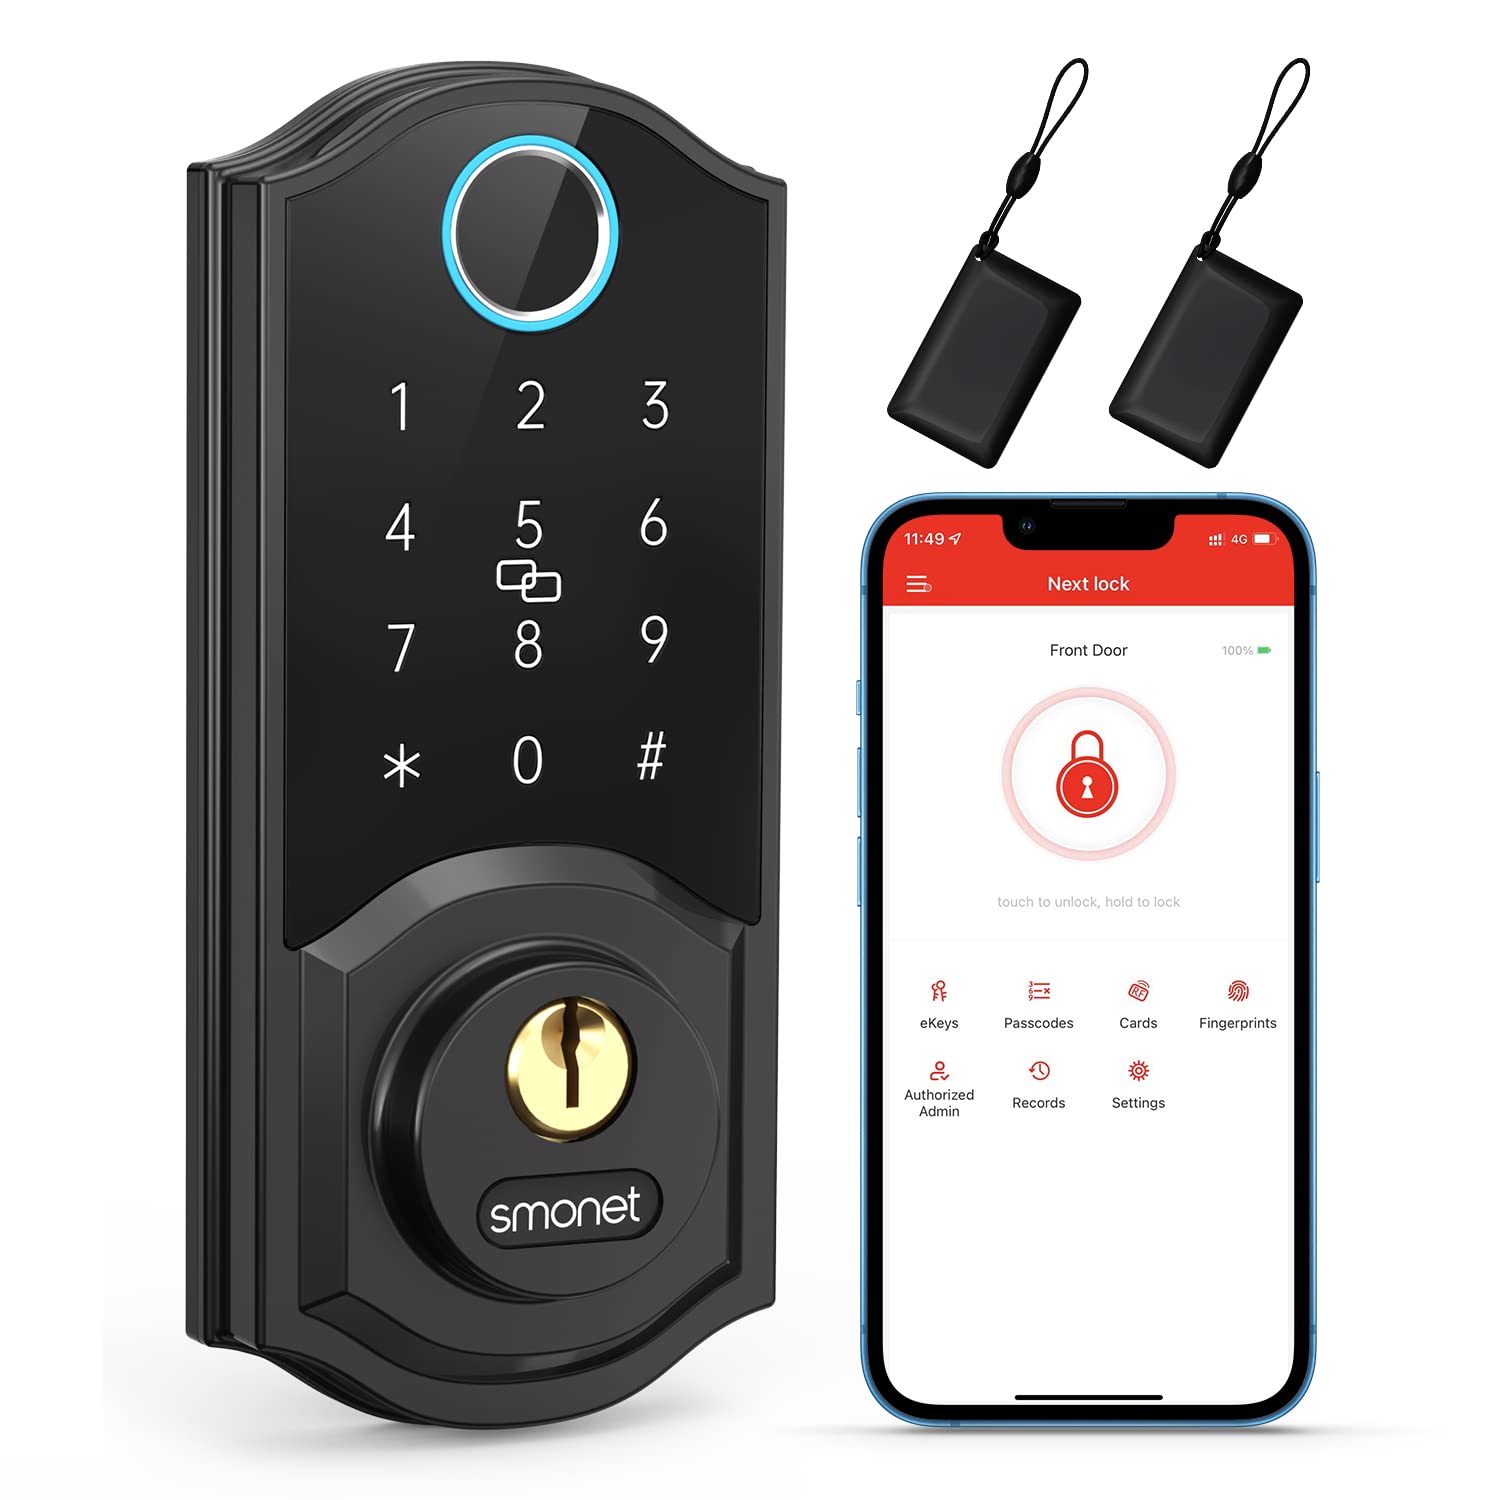 Smonet smart home lineup is growing with smart door locks, pool cleaner robots, robot Lawn Mowers, security cameras, and more home products.